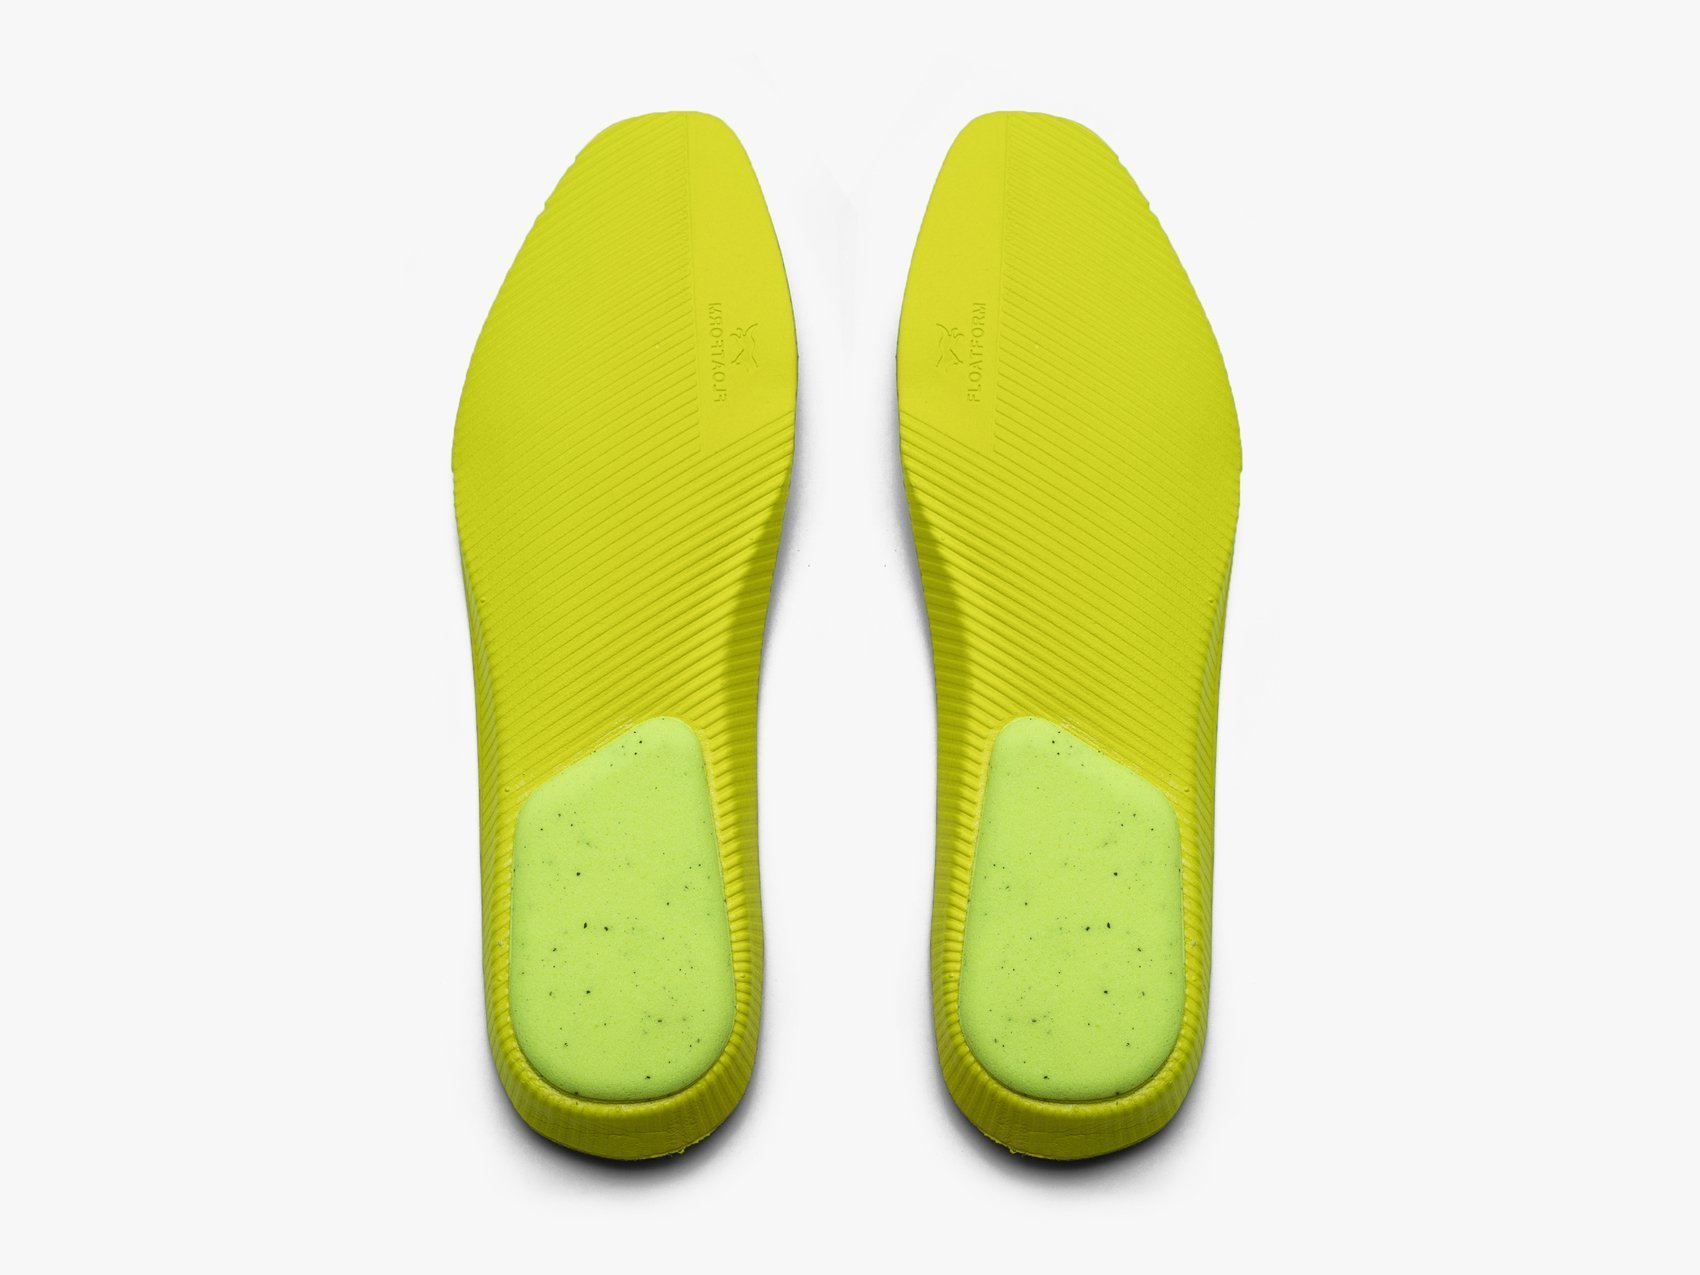 Overhead view of Insoles on a white background